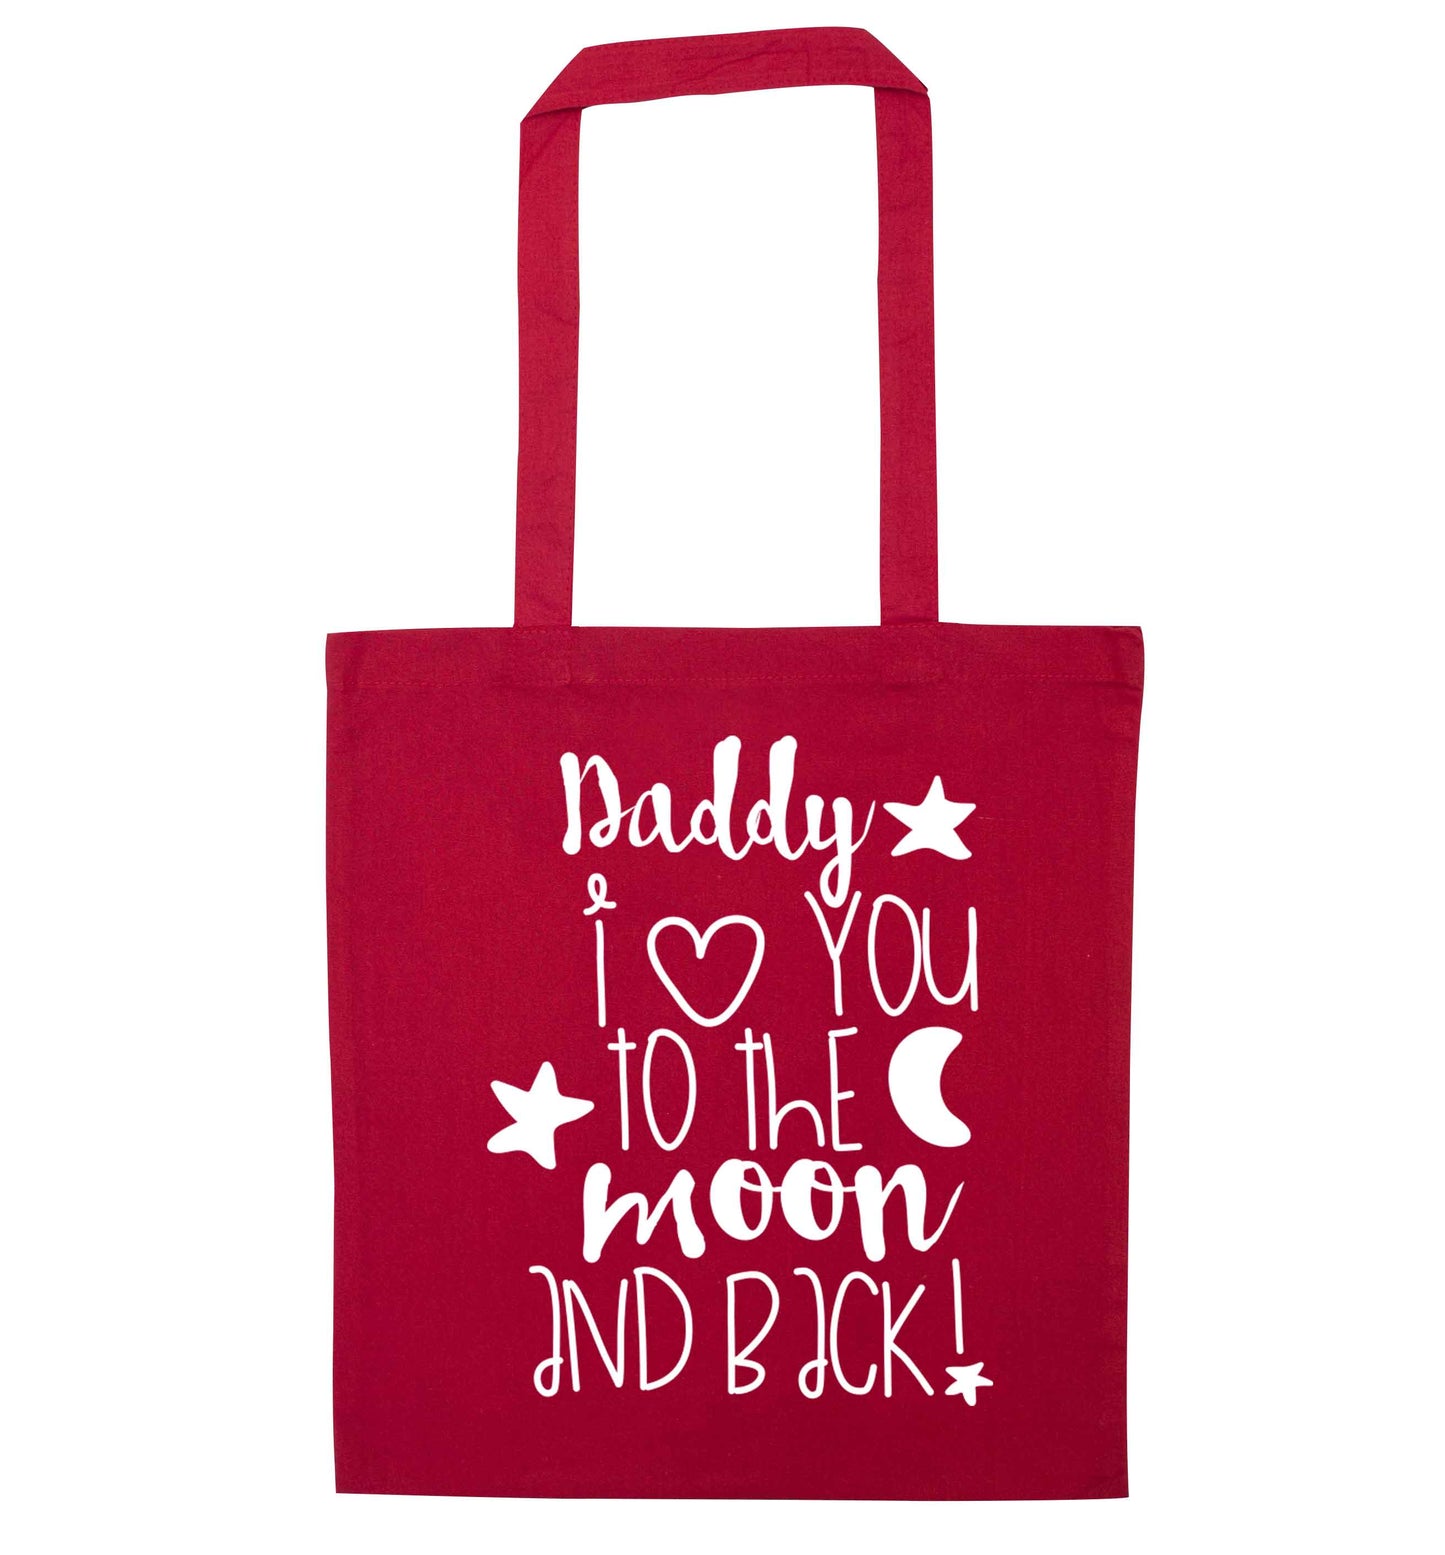 Daddy I love you to the moon and back red tote bag